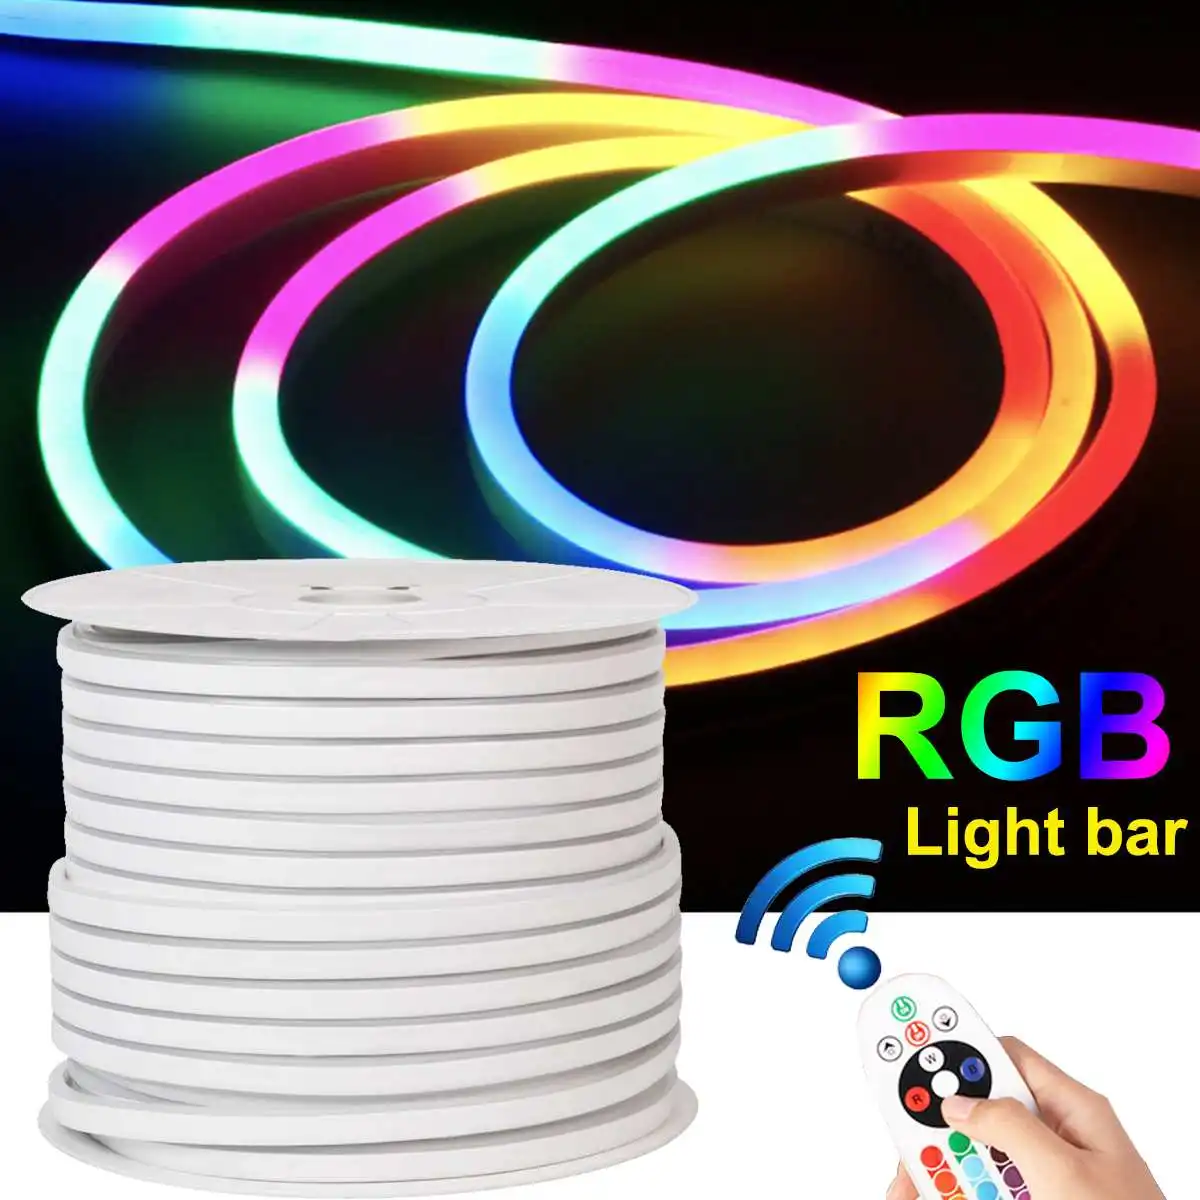 20V 12W LED Strip Light RGB Neon 1m/5m/10m w Remote Control Adapter Waterproof Flexible Tape Ribbon Backlight for Signage Party